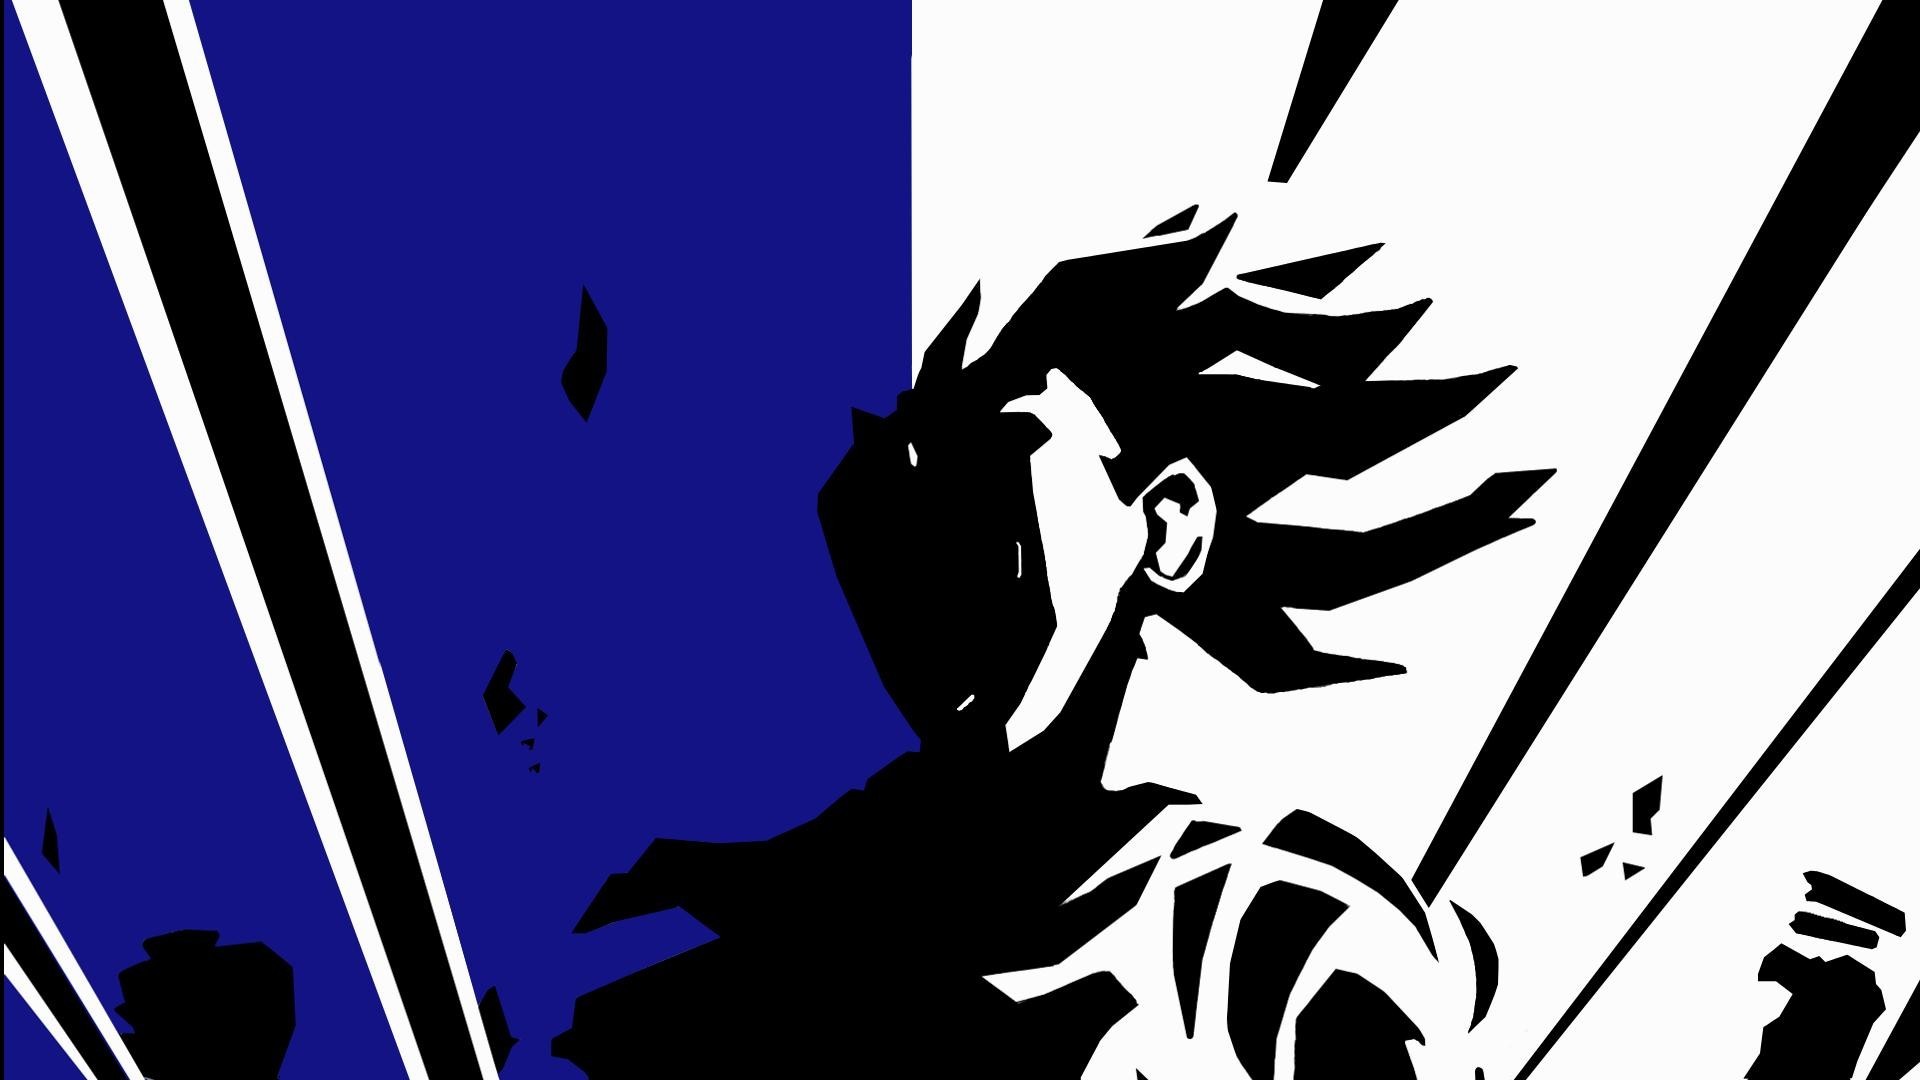 Black Goku HD Backgrounds with image resolution 1920x1080 pixel. You can make this wallpaper for your Desktop Computer Backgrounds, Mac Wallpapers, Android Lock screen or iPhone Screensavers